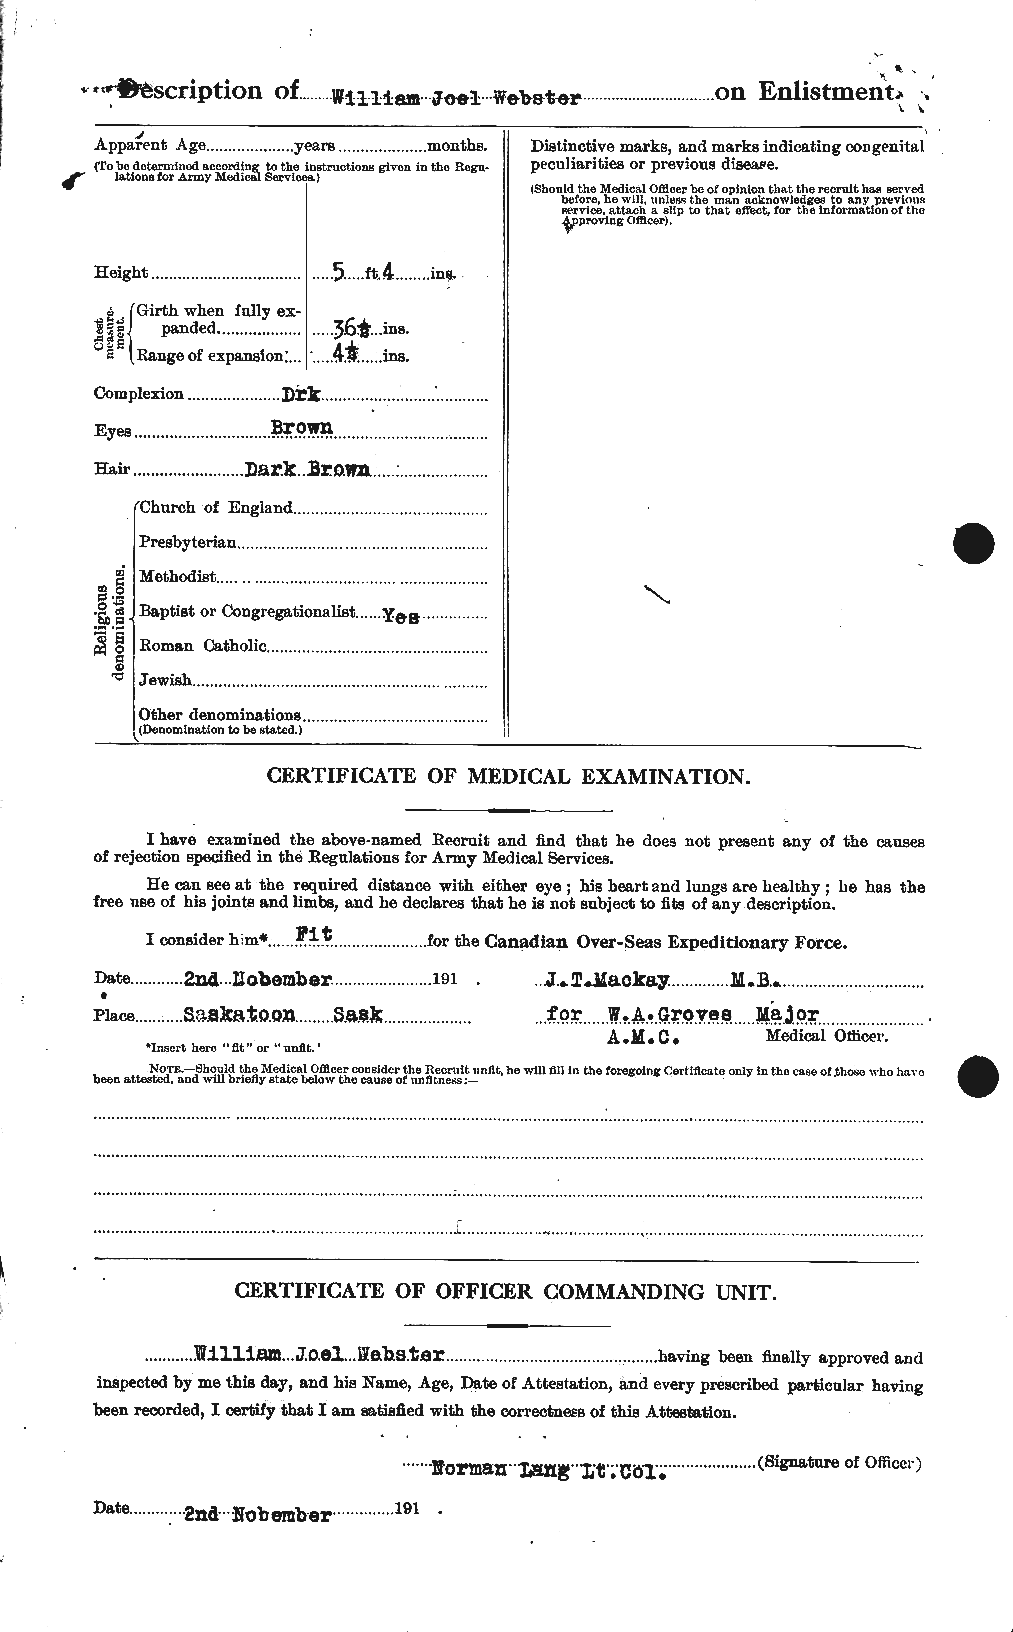 Personnel Records of the First World War - CEF 662032b